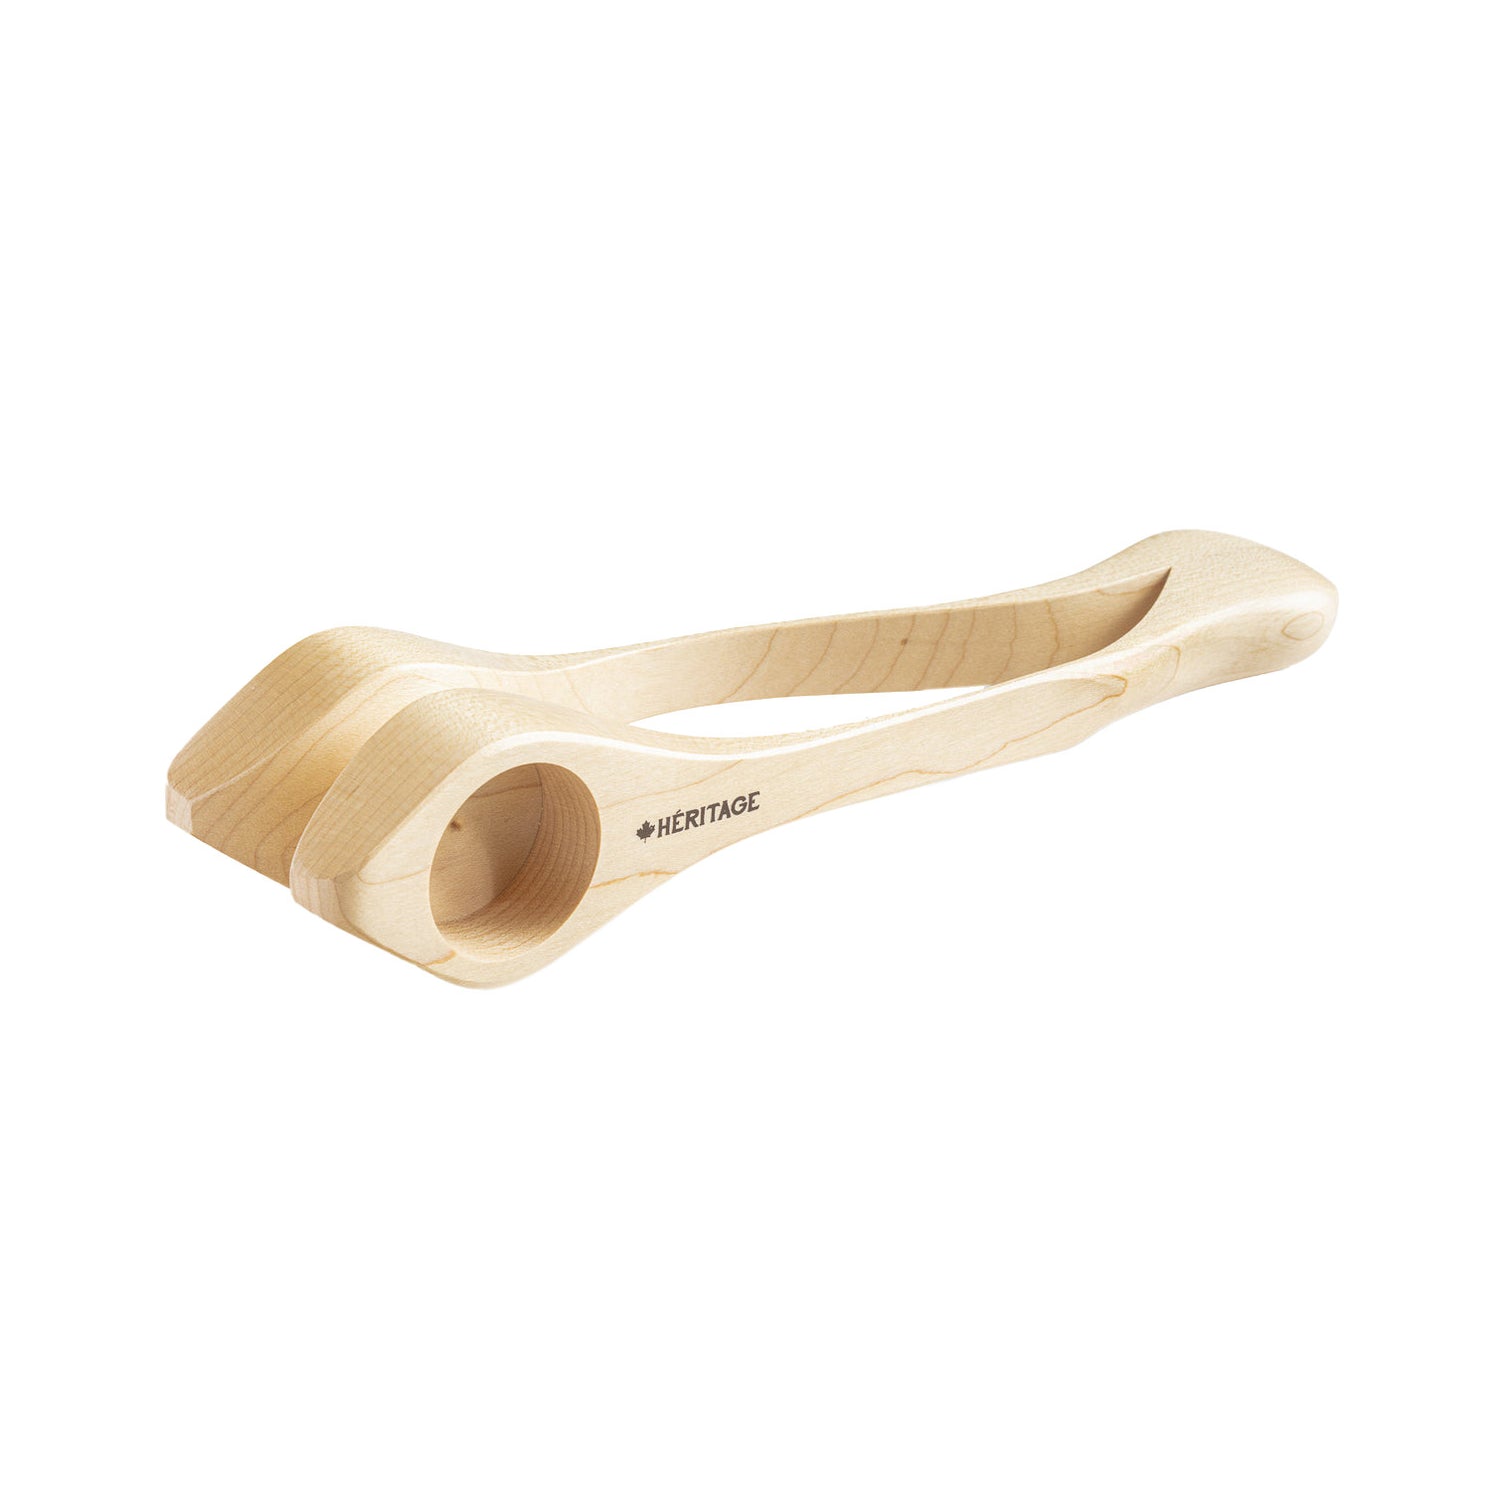 Image 1 of Heritage Musical Spoons, Medium, Natural - SKU# SPOONS-MN : Product Type Percussion Instruments : Elderly Instruments